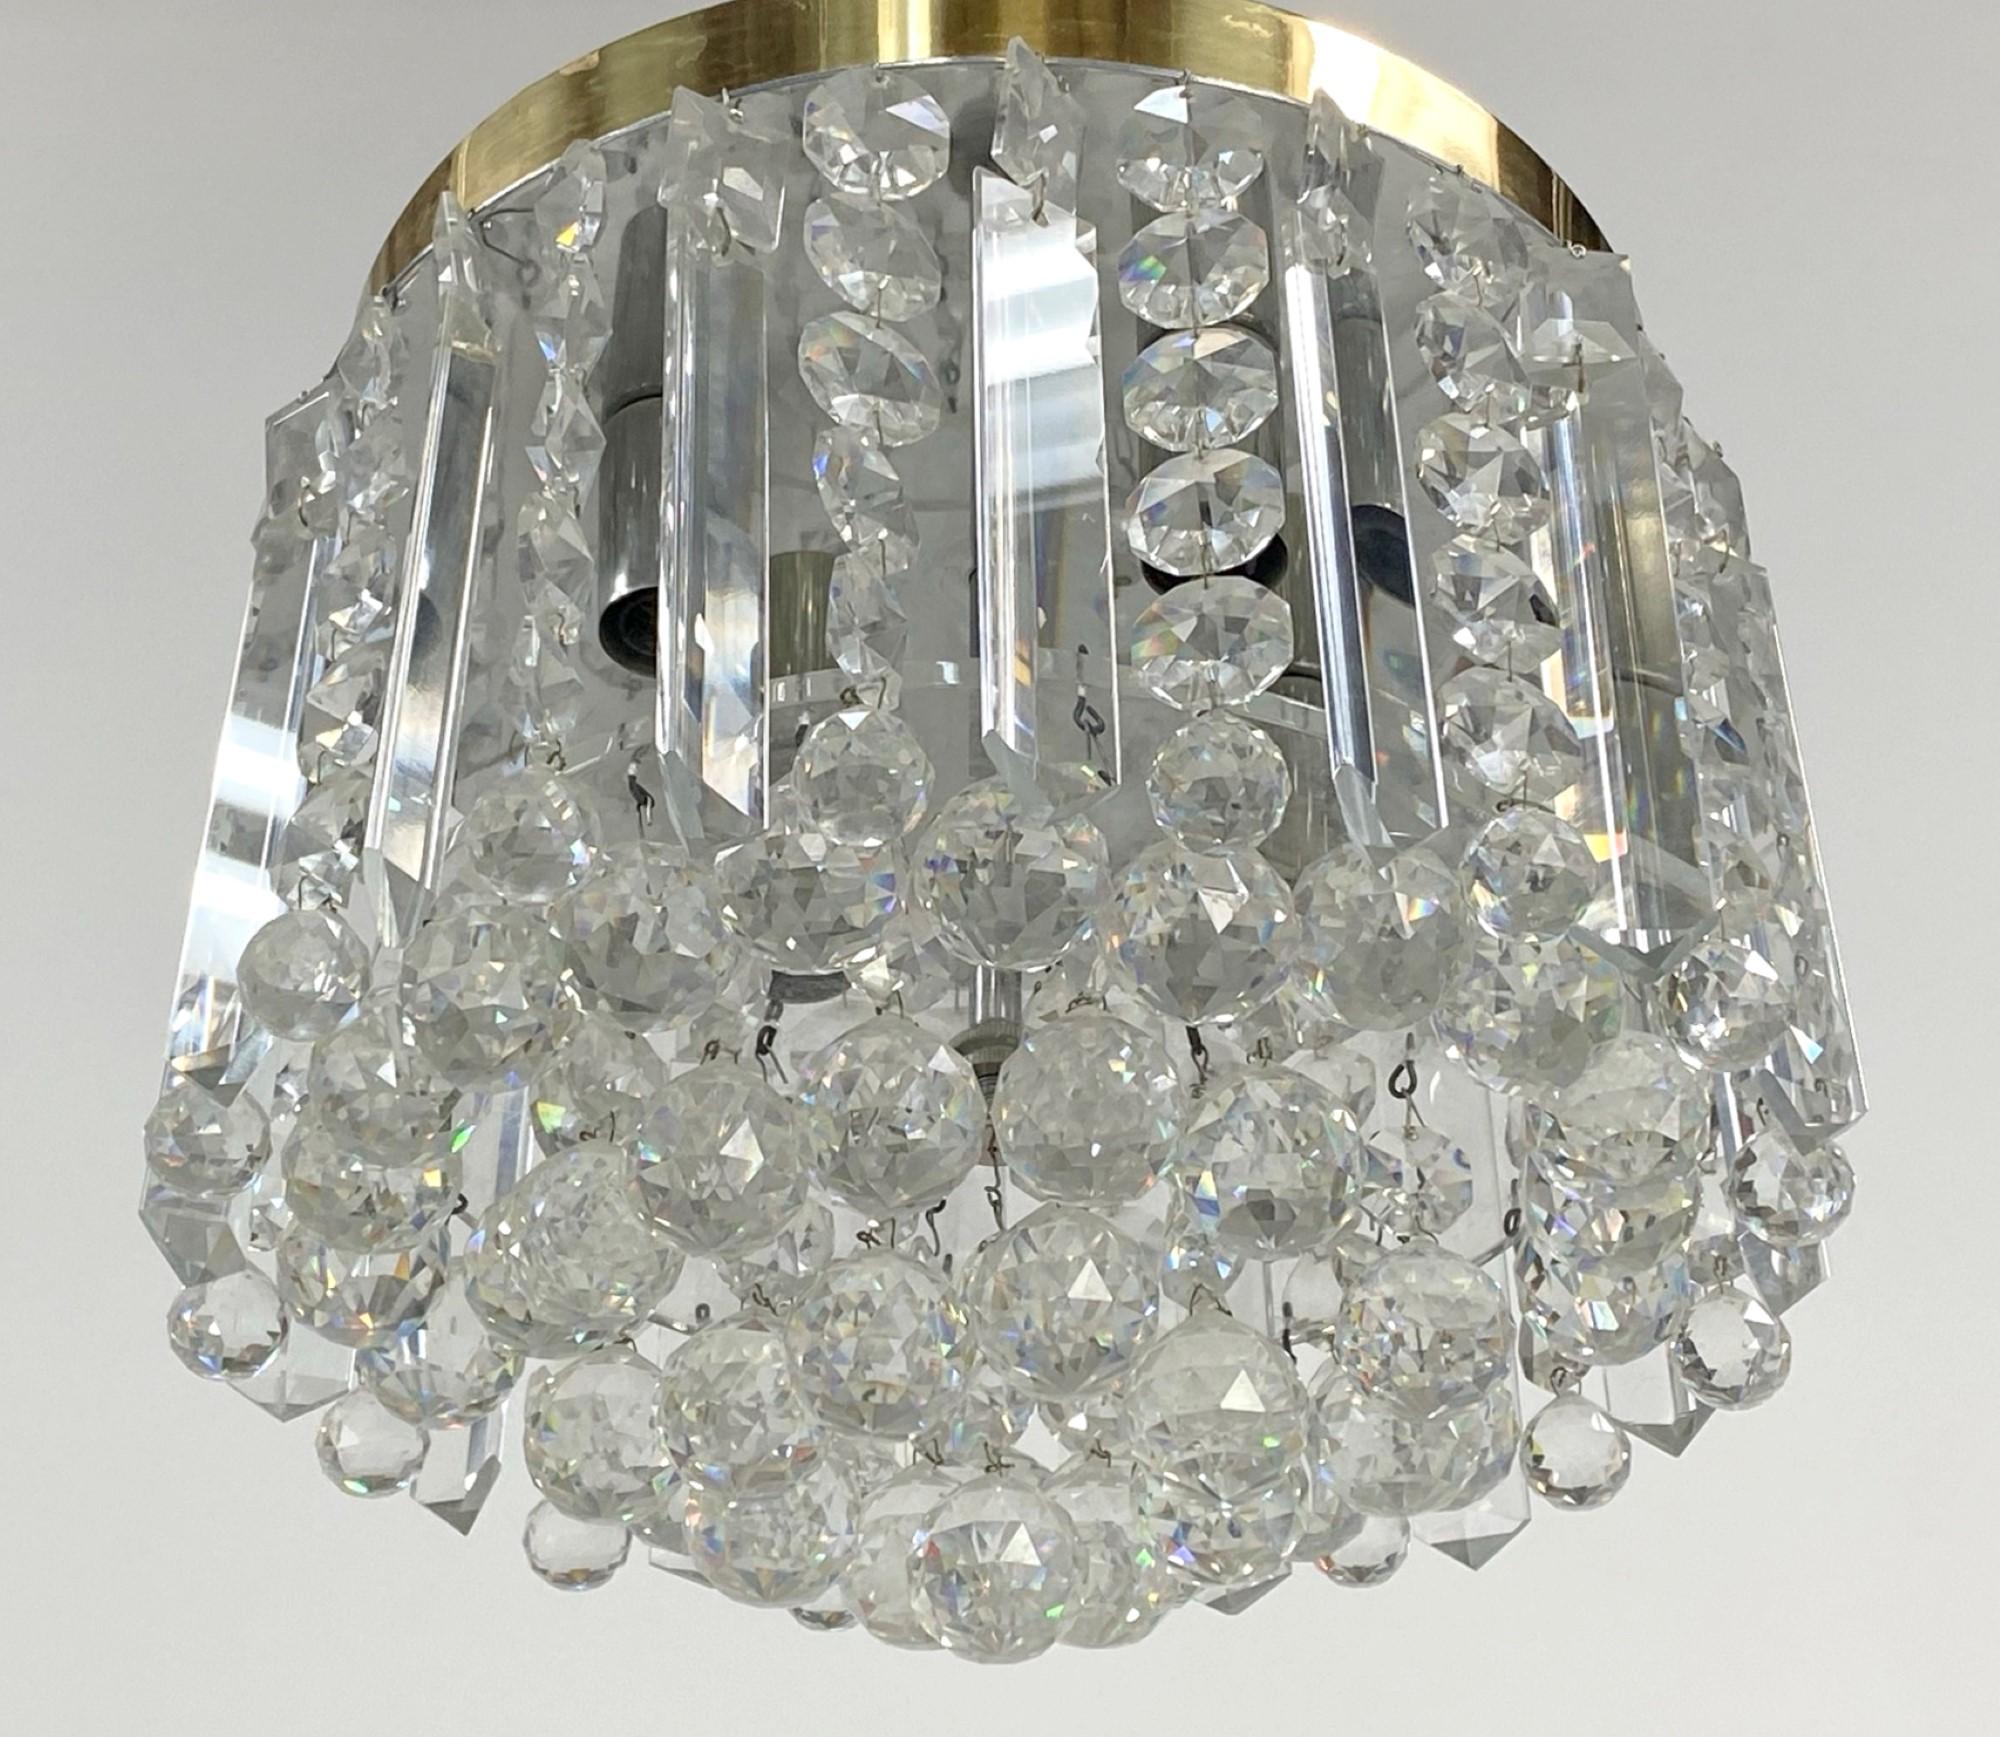 American Mid-Century Modern Crystal Flush Mount Chandelier from Beverly Hills